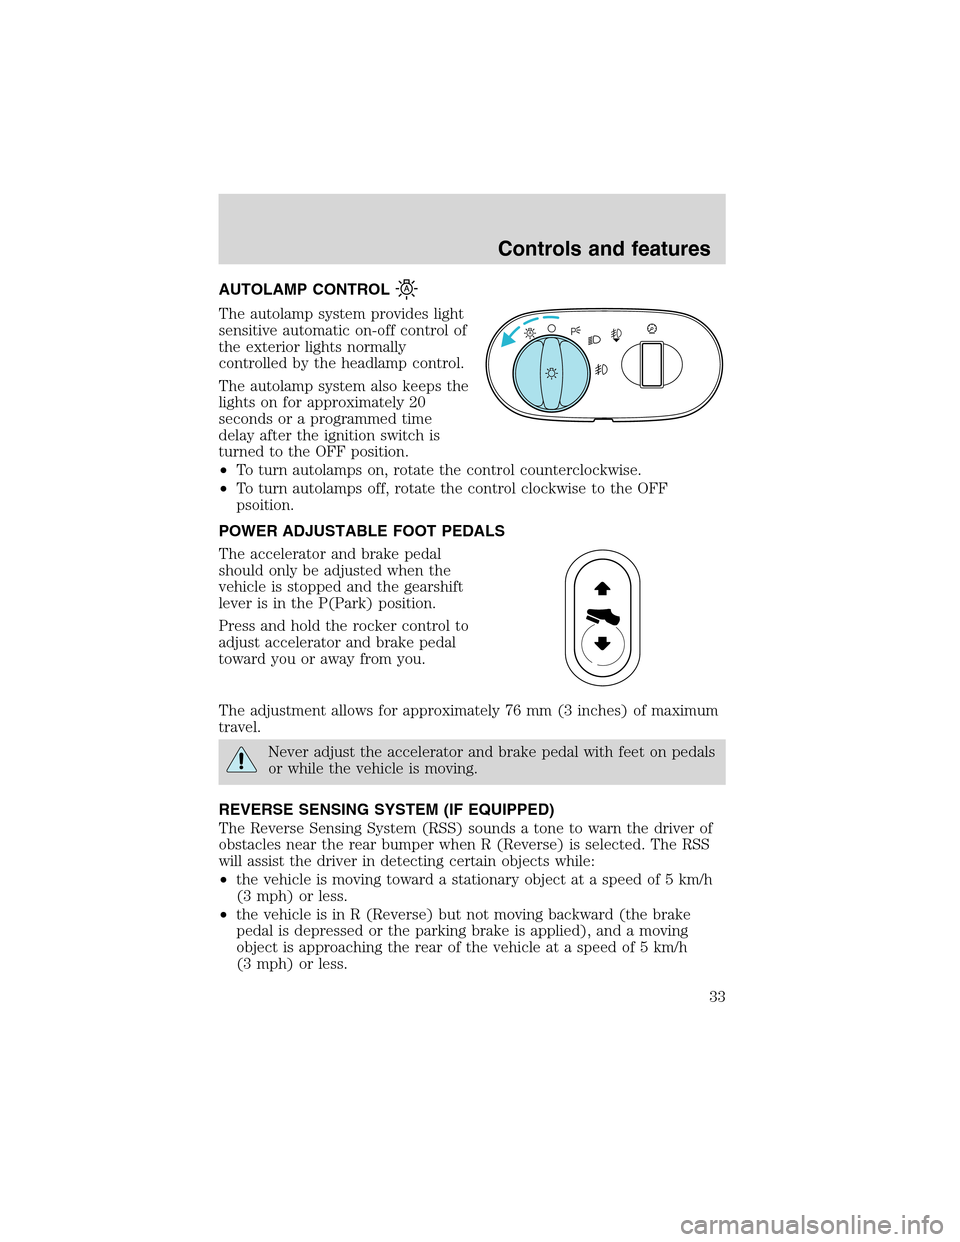 Mercury Mountaineer 2002  s Owners Guide AUTOLAMP CONTROL
The autolamp system provides light
sensitive automatic on-off control of
the exterior lights normally
controlled by the headlamp control.
The autolamp system also keeps the
lights on 